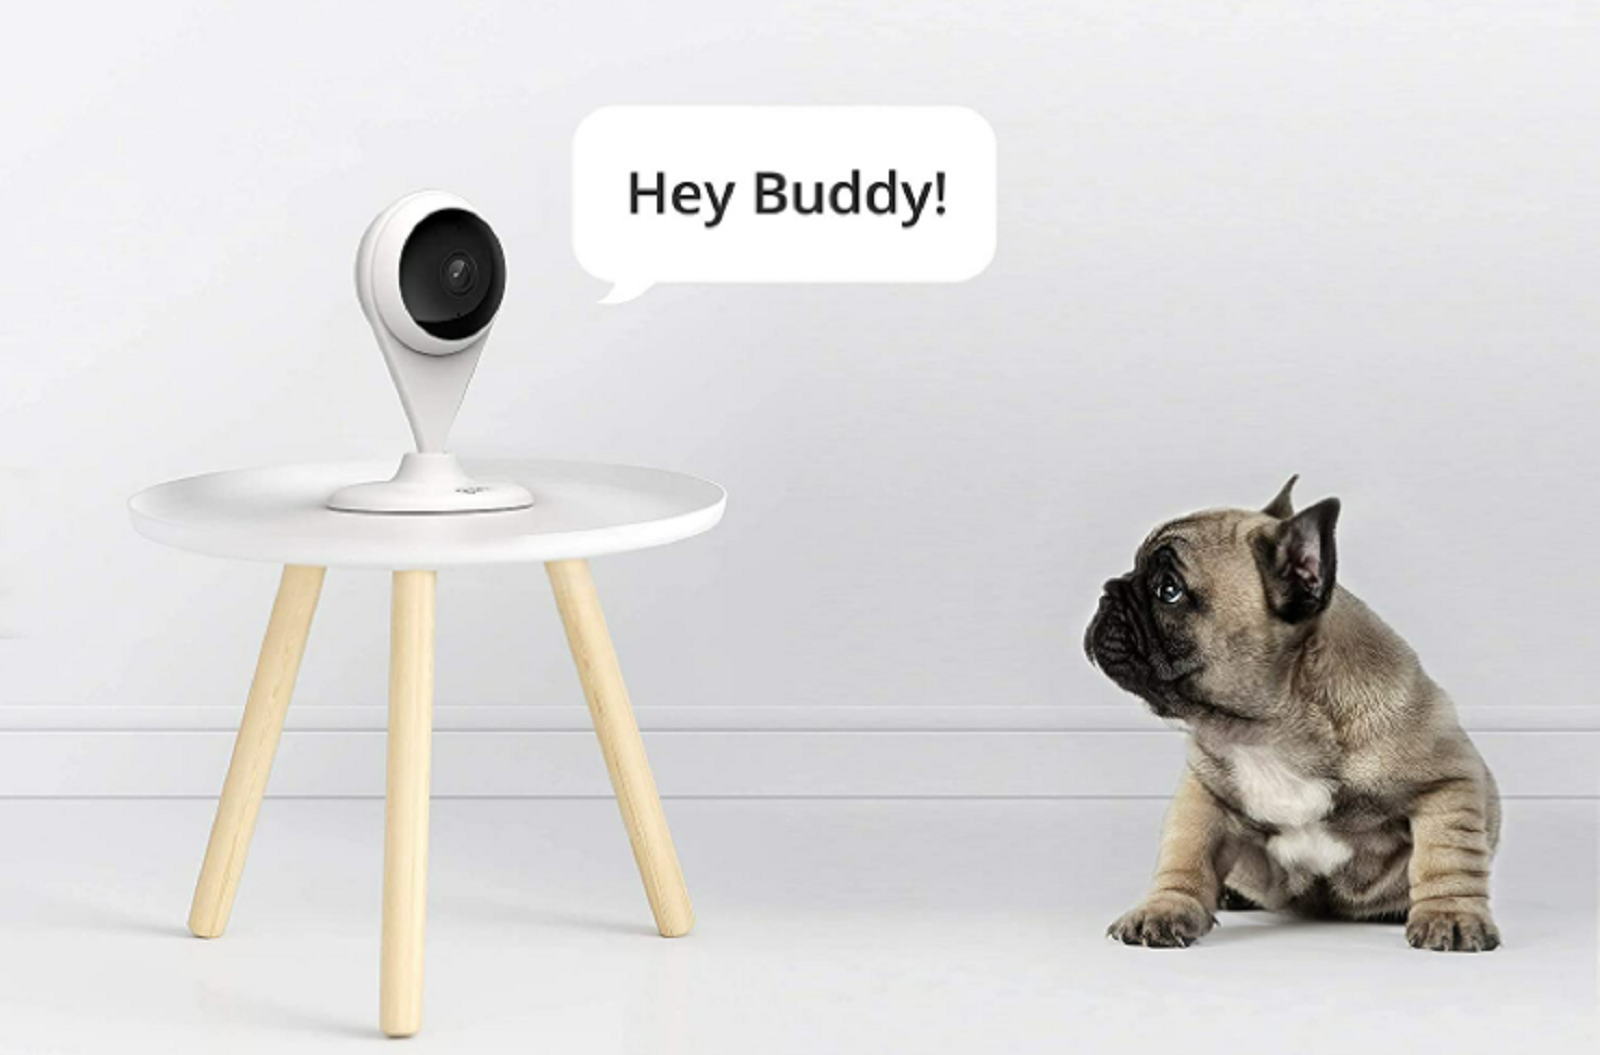 360 AC1C indoor security camera review low cost security camera that is simple to set up and use zdnet